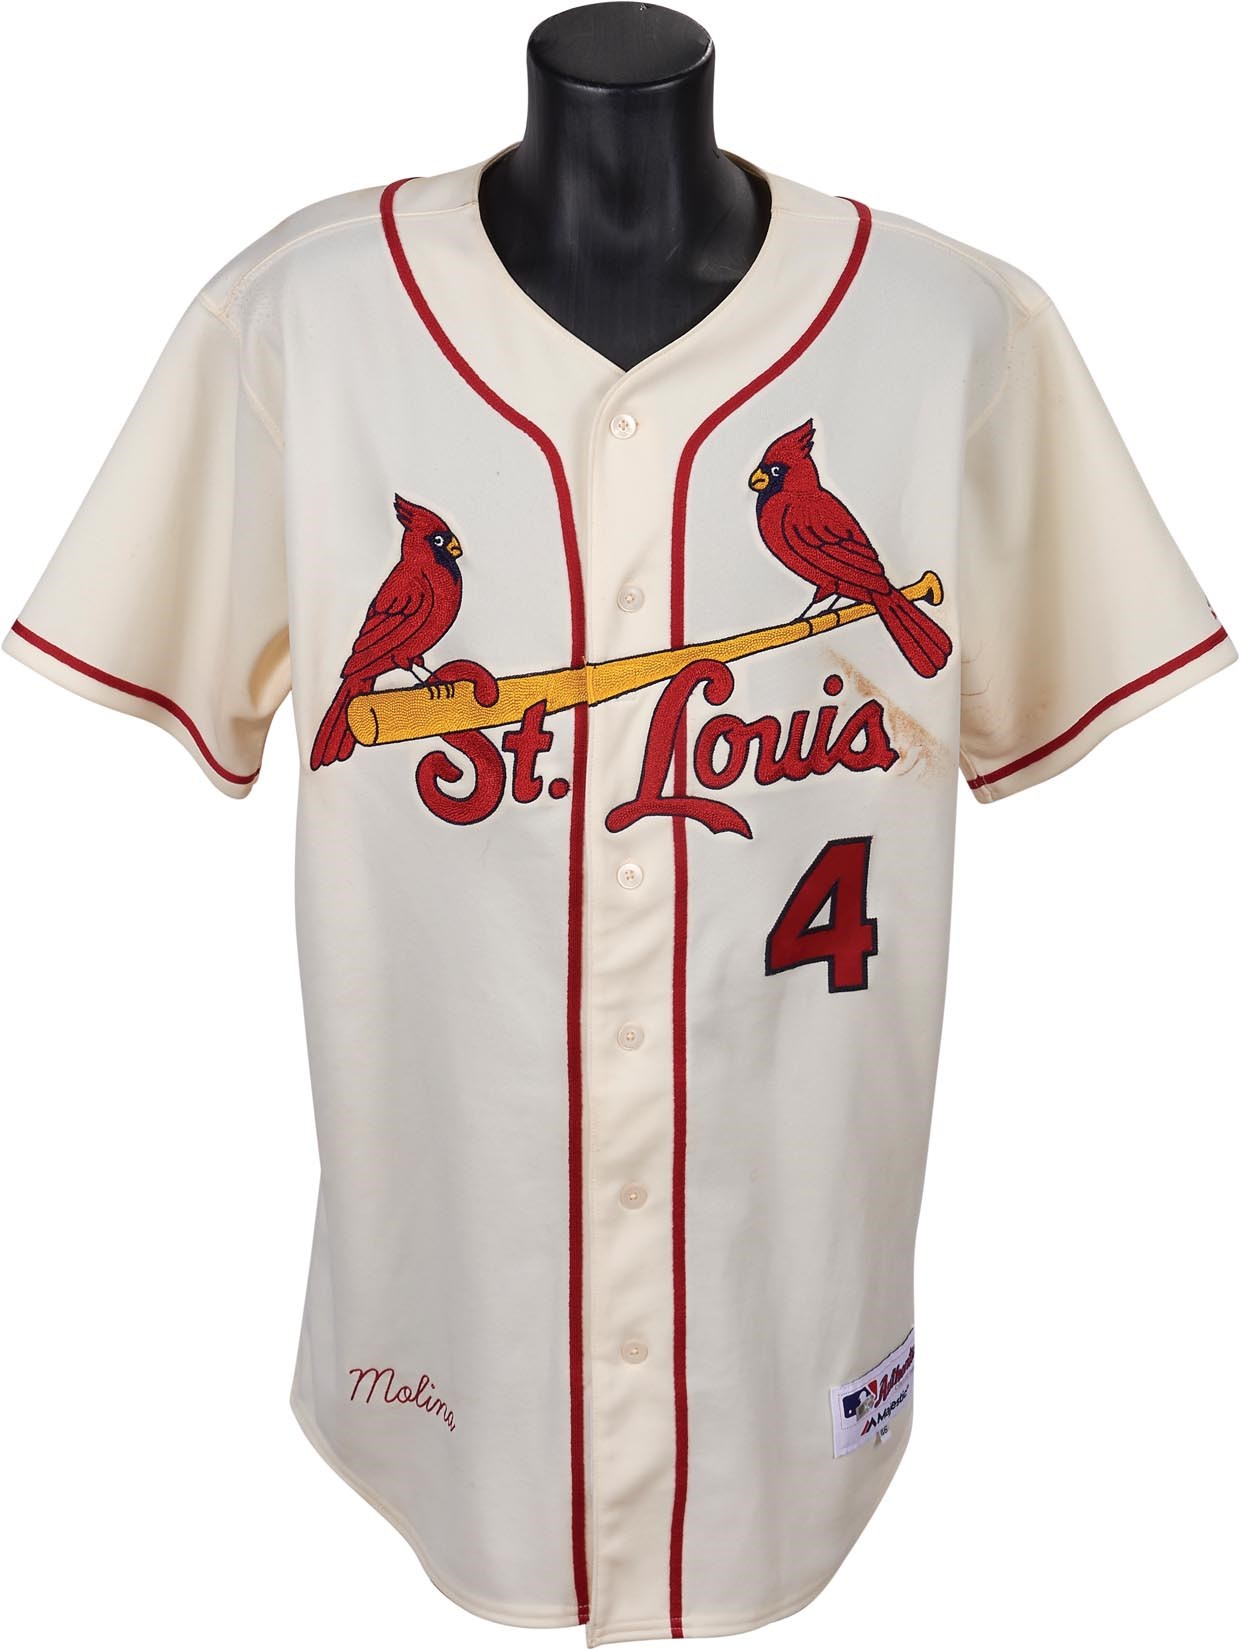 2016 Yadier Molina Game Worn 1,500th Career Hit Jersey (MLB Auth. & Photo-Matched)